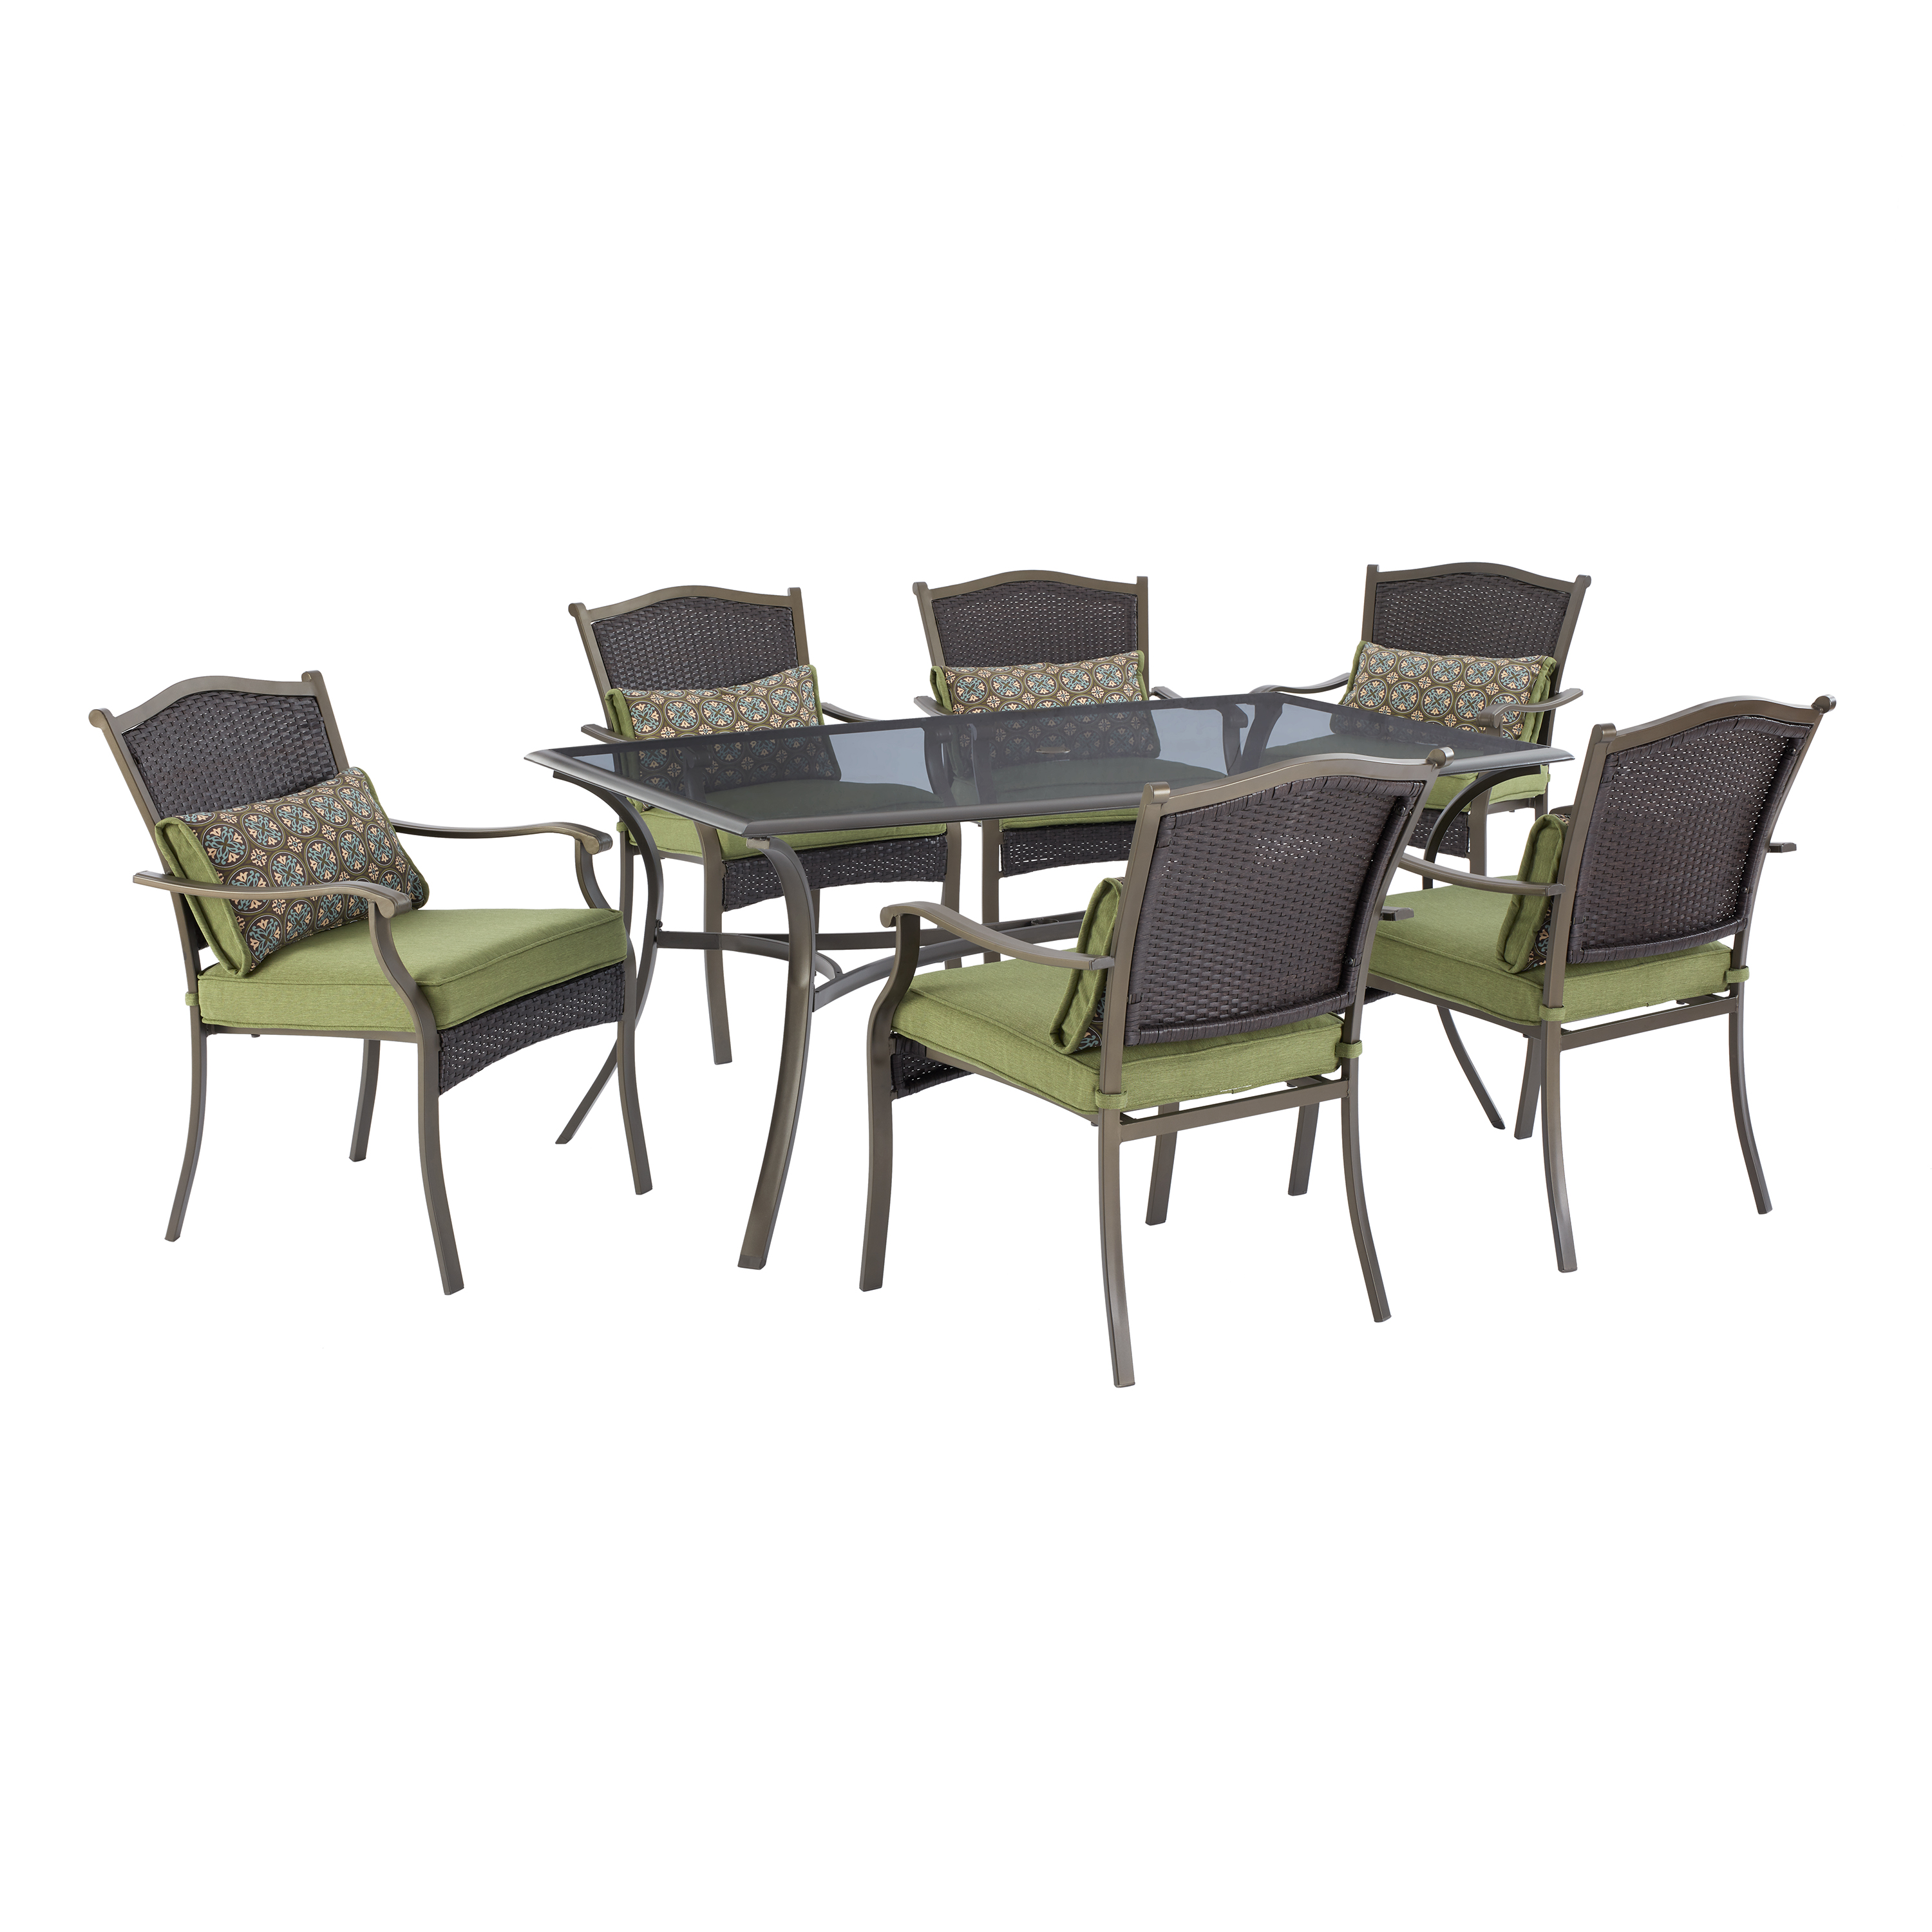 Better Homes and Gardens Providence Patio Dining Set, Outdoor 7 Piece Cushioned Metal, Green - image 5 of 10